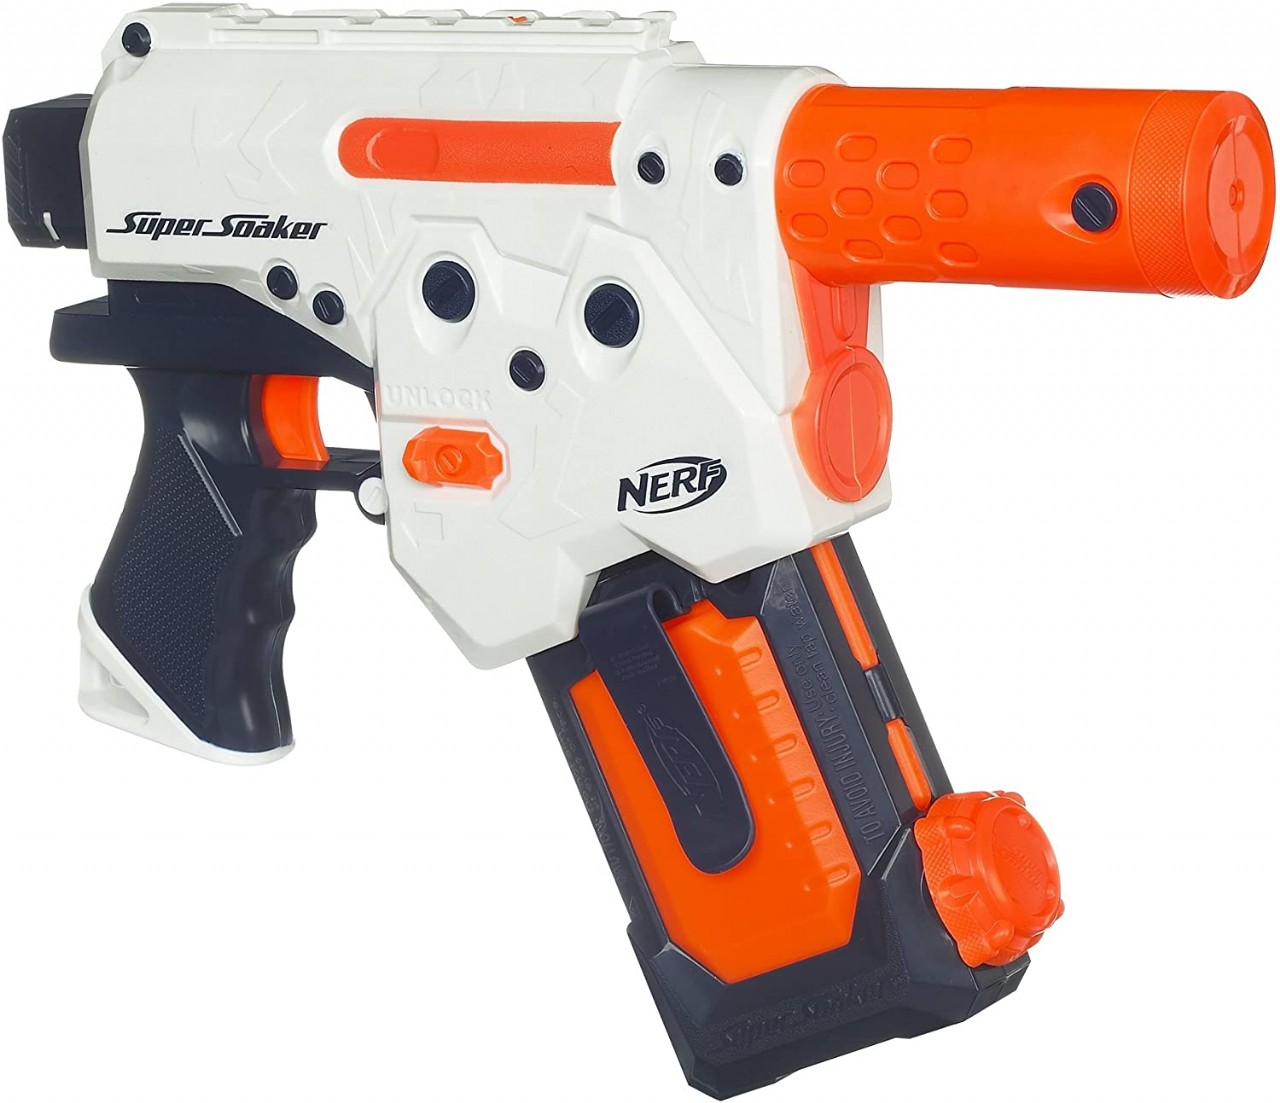 Super Soaker Thunderstorm (Discontinued by manufacturer)